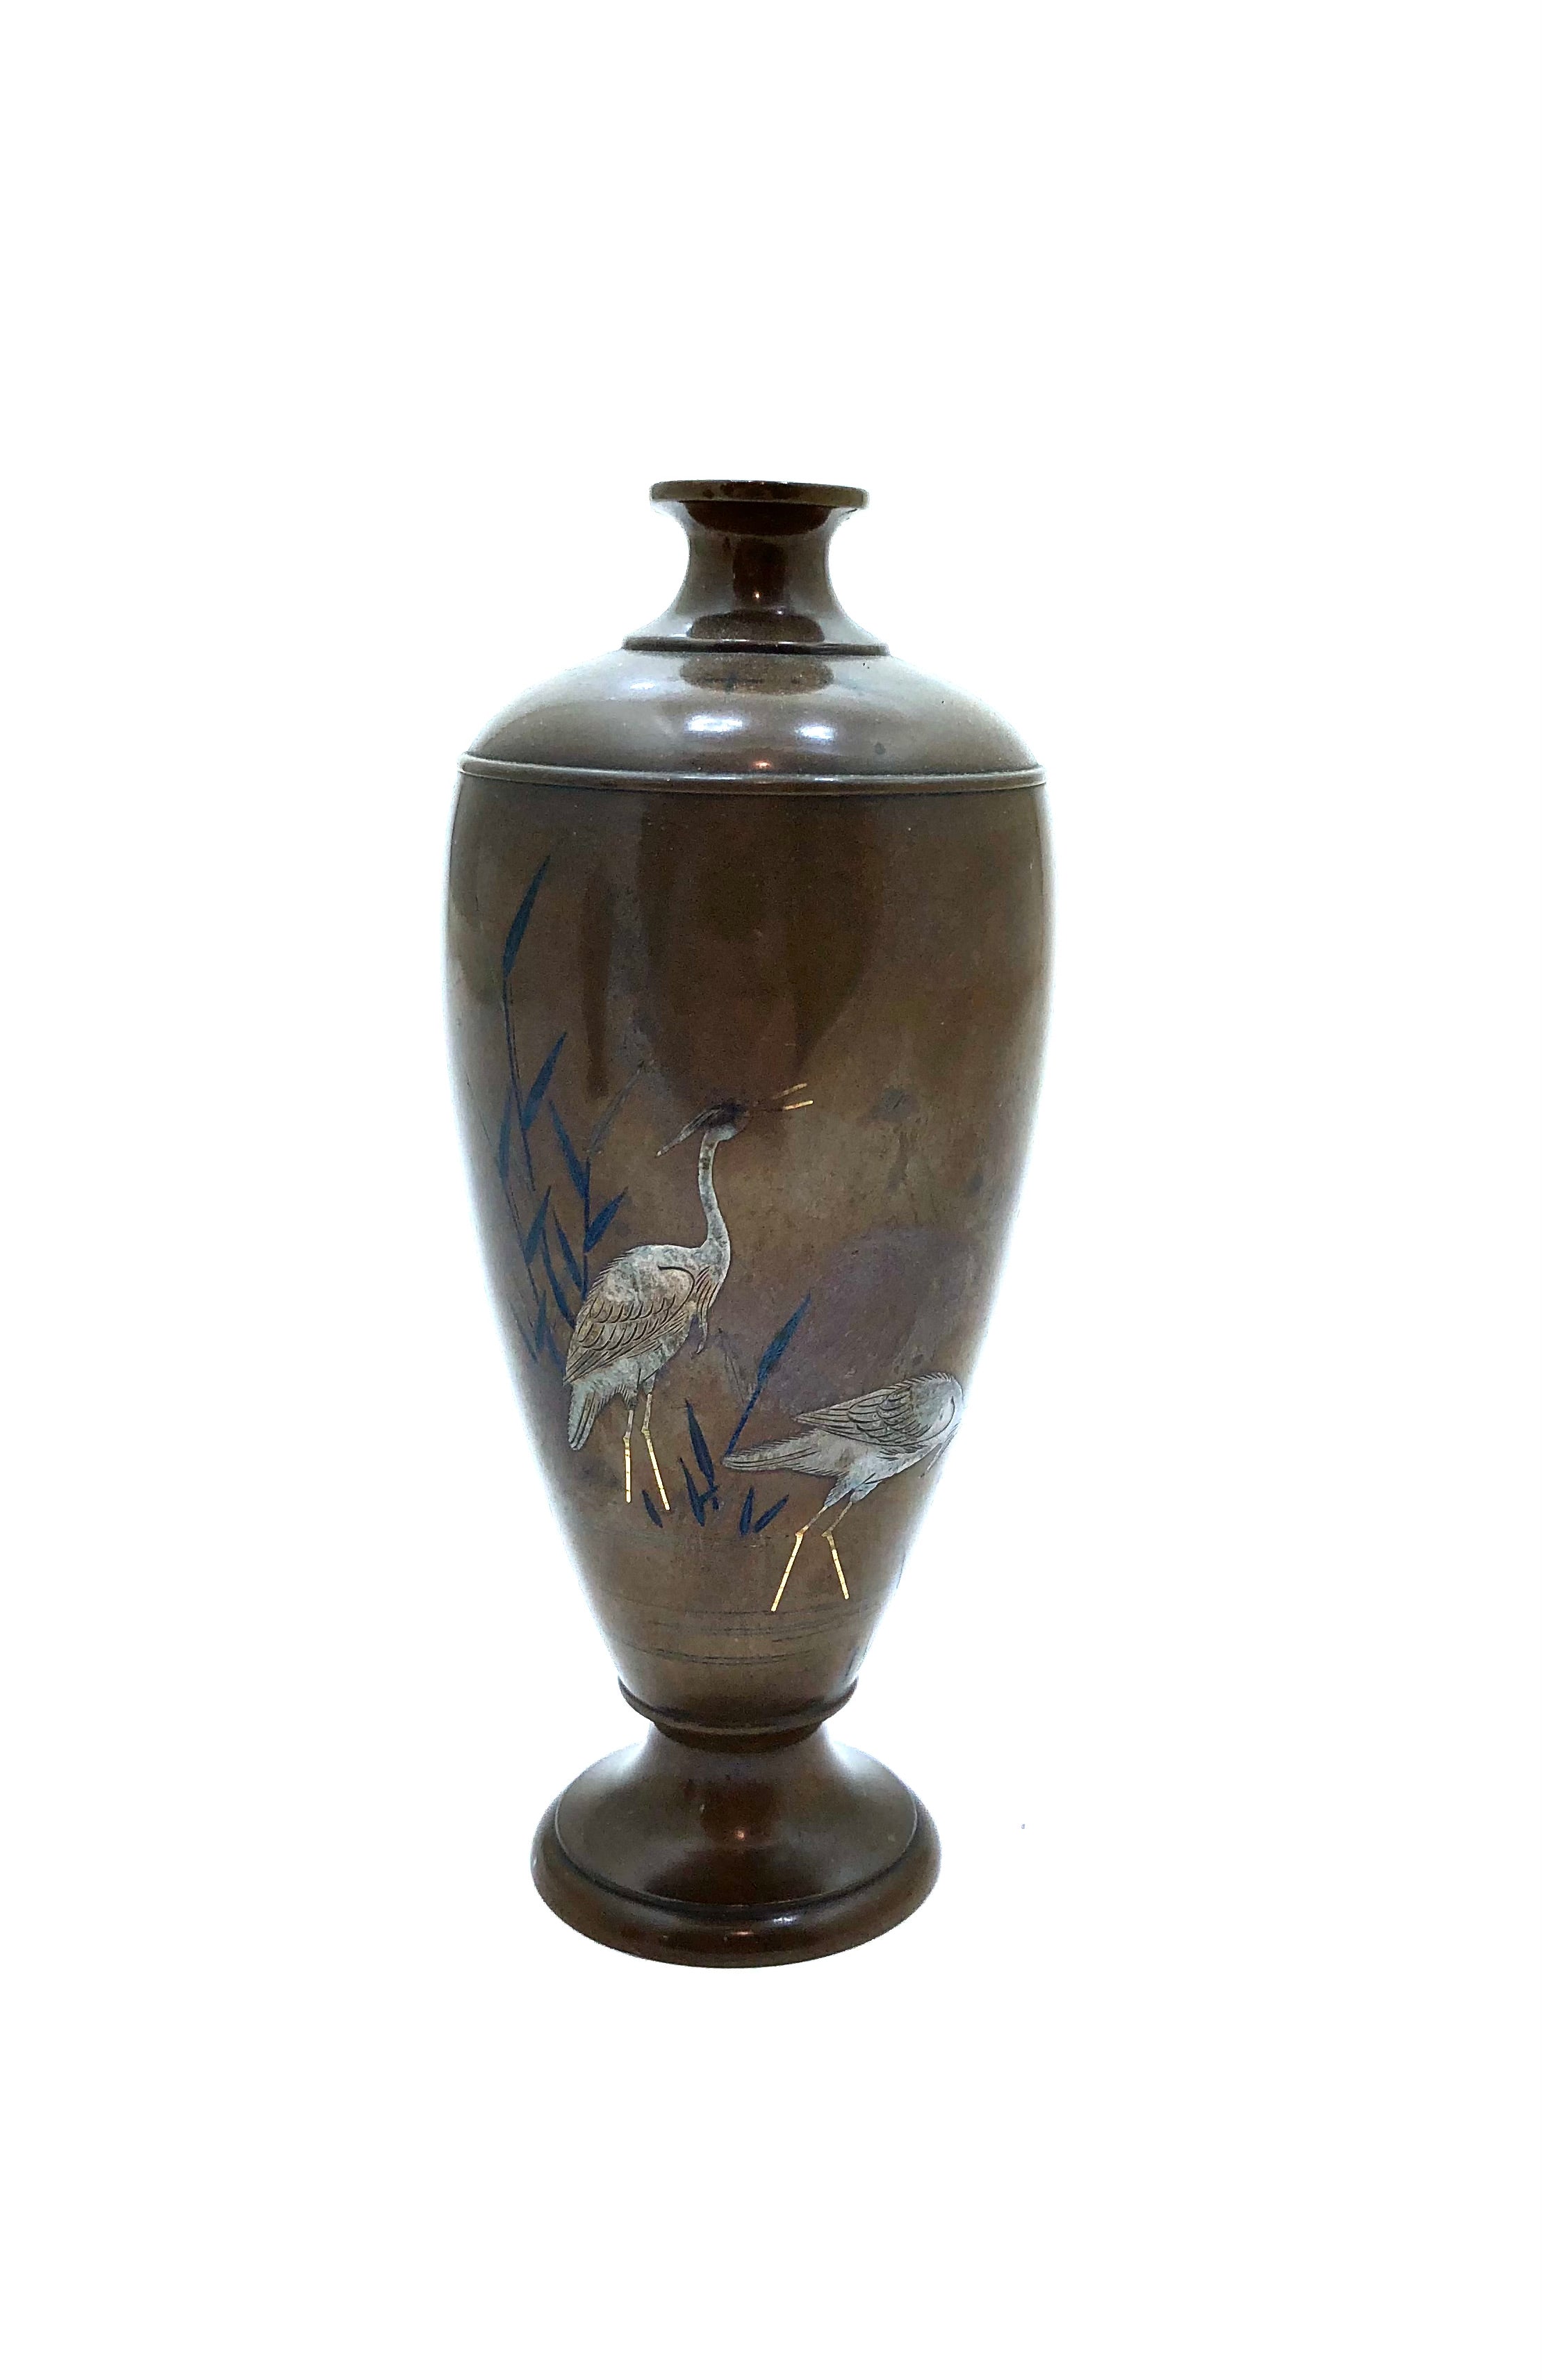 Pair of Antique Japanese Inlaid Bronze Baluster Vase with Snowy Egret Decoration in gold and silver